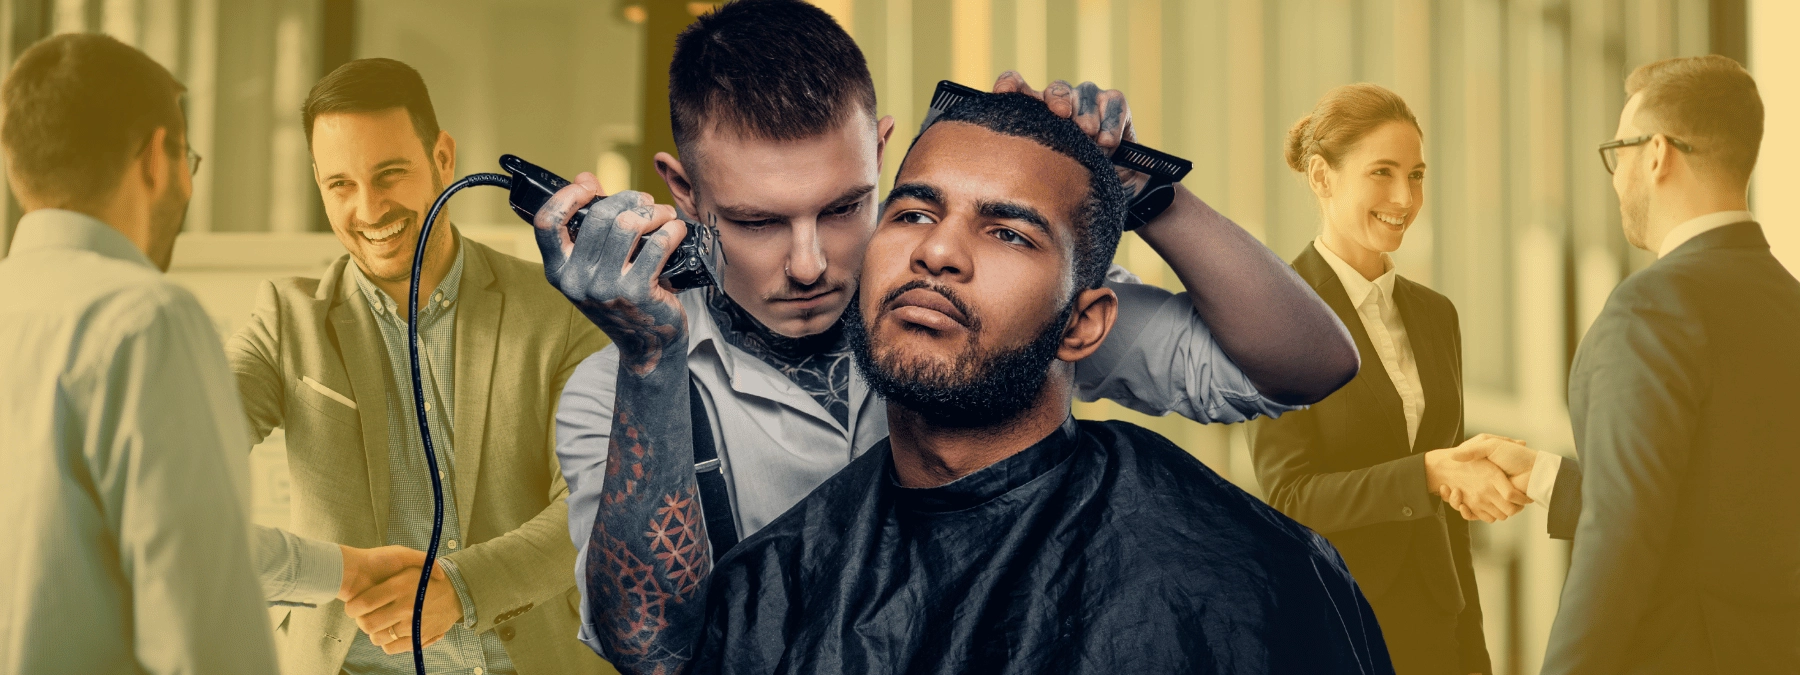 Barber cutting customer's hair with electric clippers